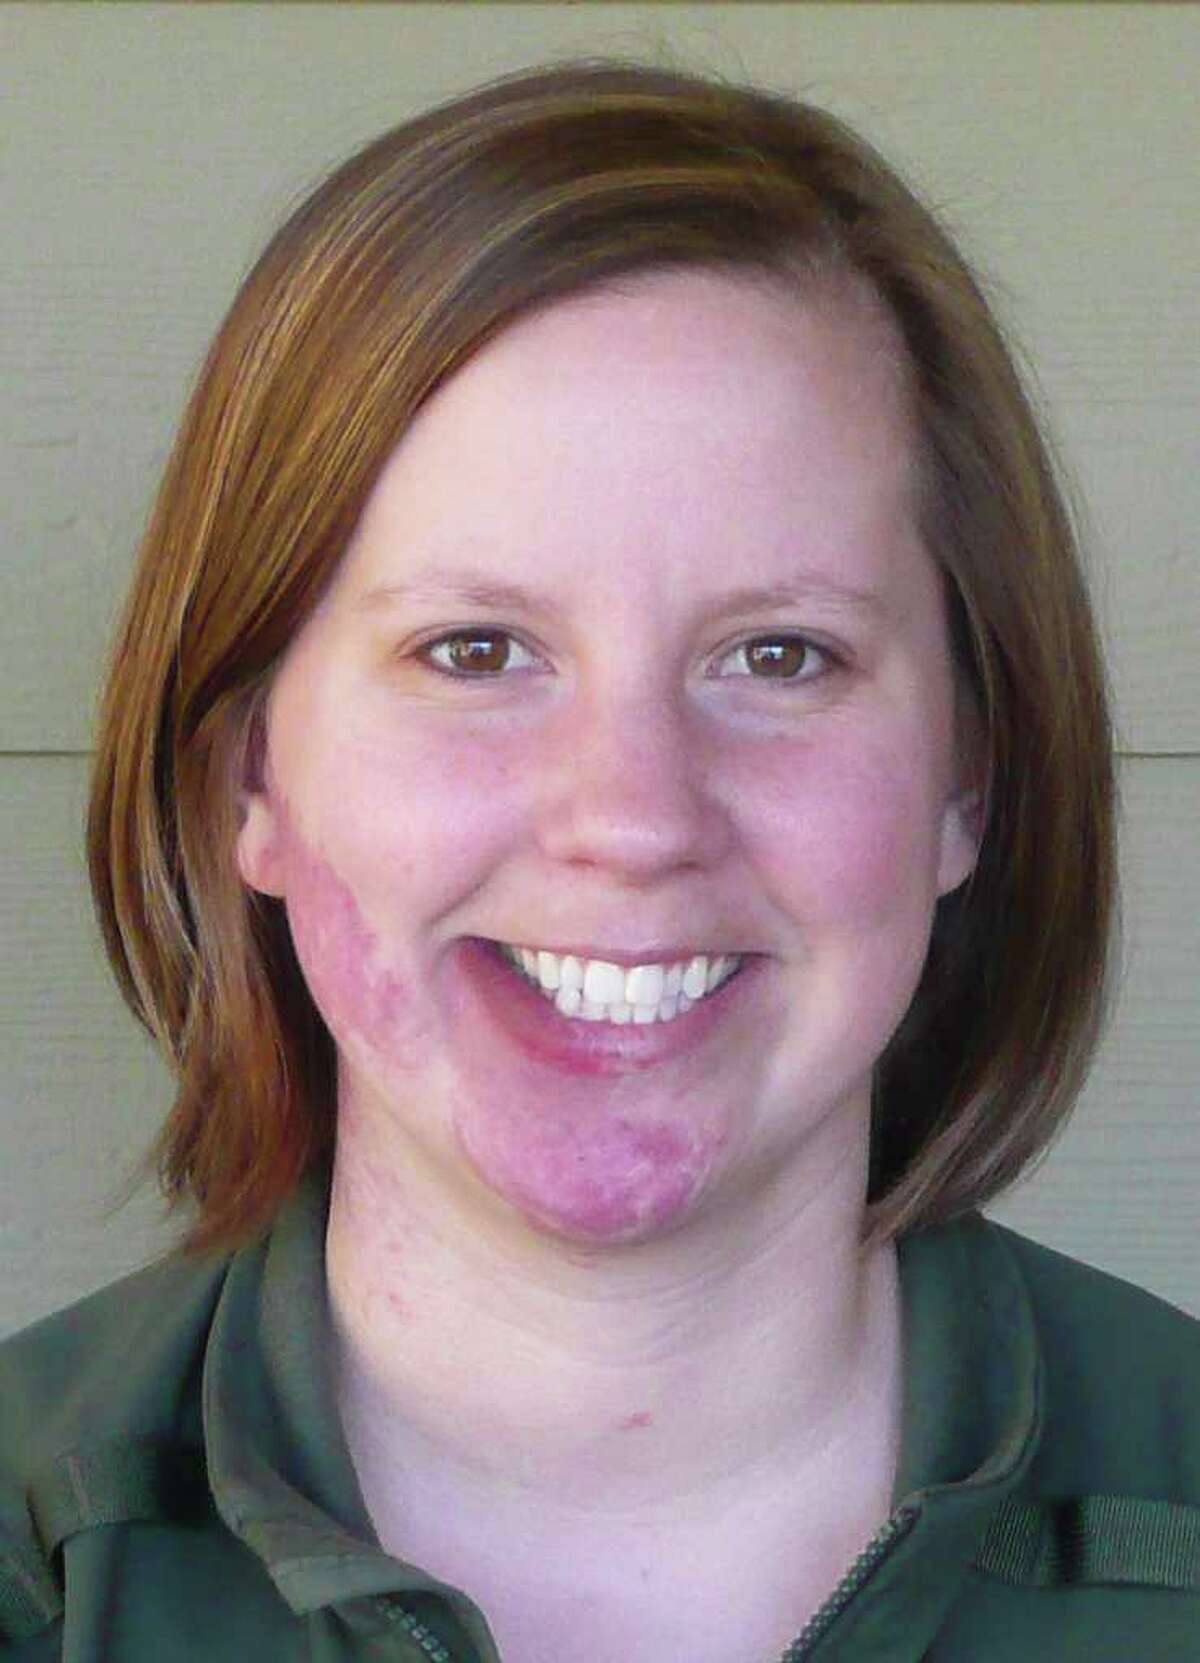 This undated photo provided by Mount Rainier National Park shows park Ranger Margaret Anderson. Anderson, 34, was fatally shot Sunday, Jan. 1, 2012, at Mount Rainier National Park in Washington state, according to the National Park Service. Officials closed the park after the shooting Sunday, and asked people to stay out of the area while they search for a man carrying a long rifle.